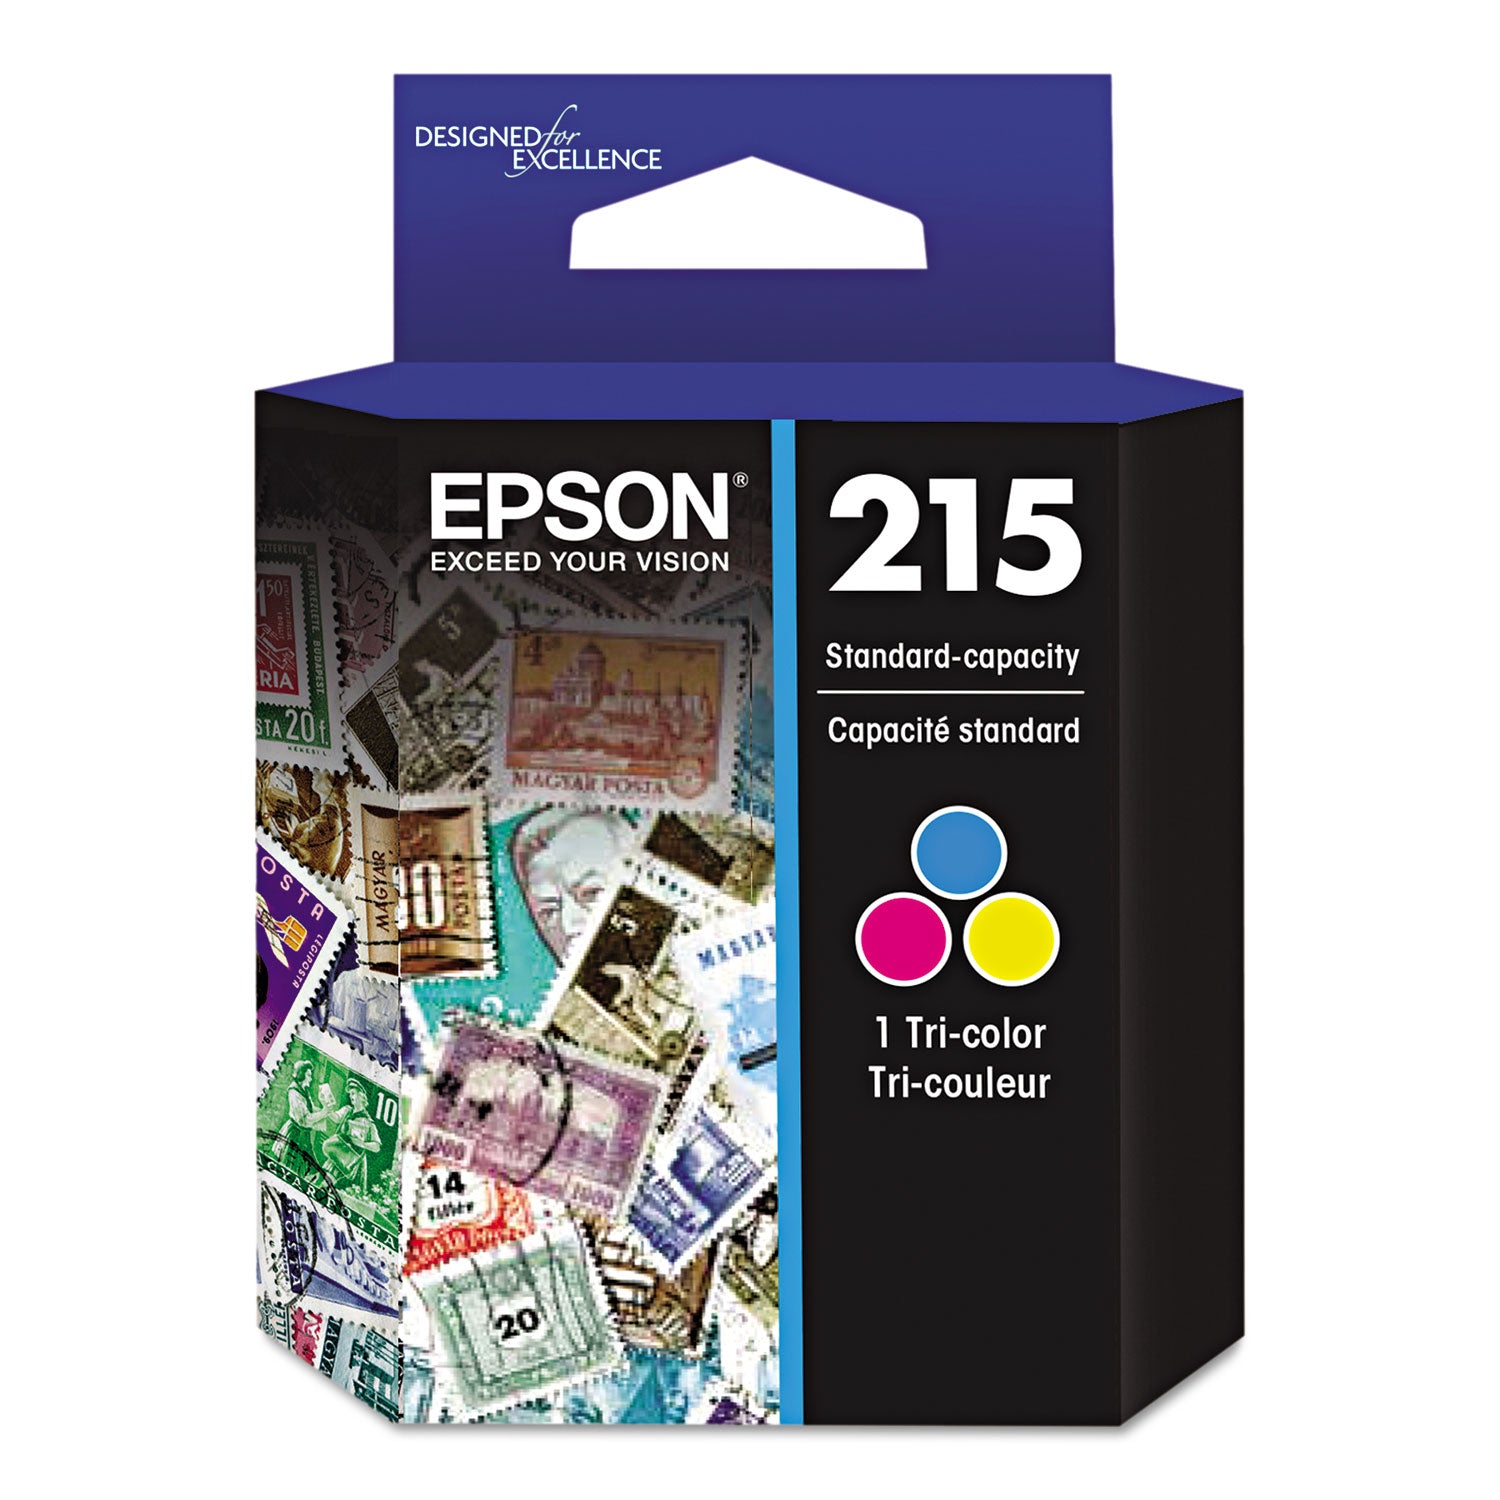 t215530-s-215-durabrite-ultra-ink-tri-color_epst215530s - 1